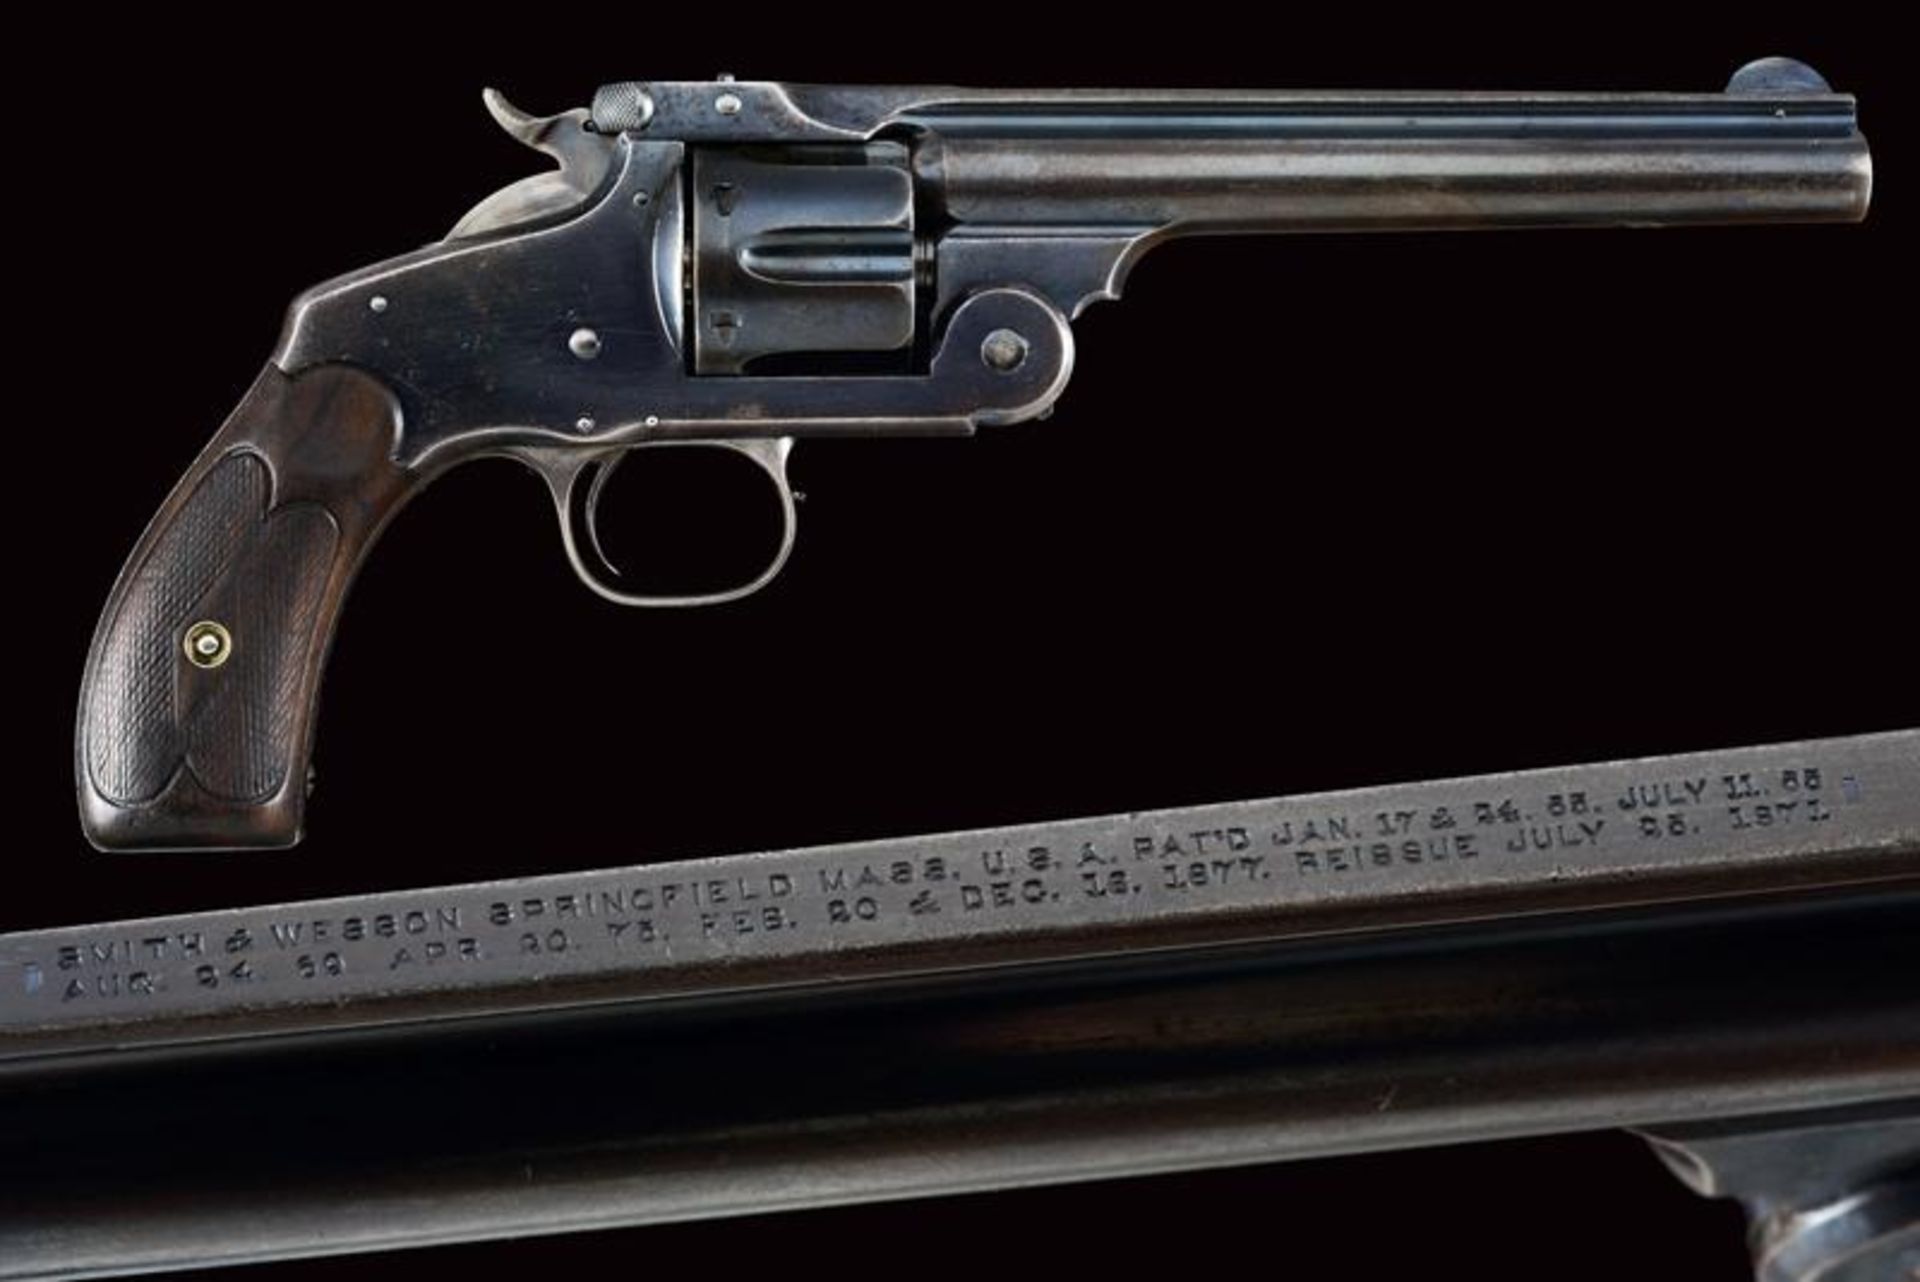 An interesting S&W New Model No. 3 Single Action Revolver for the Japanese navy